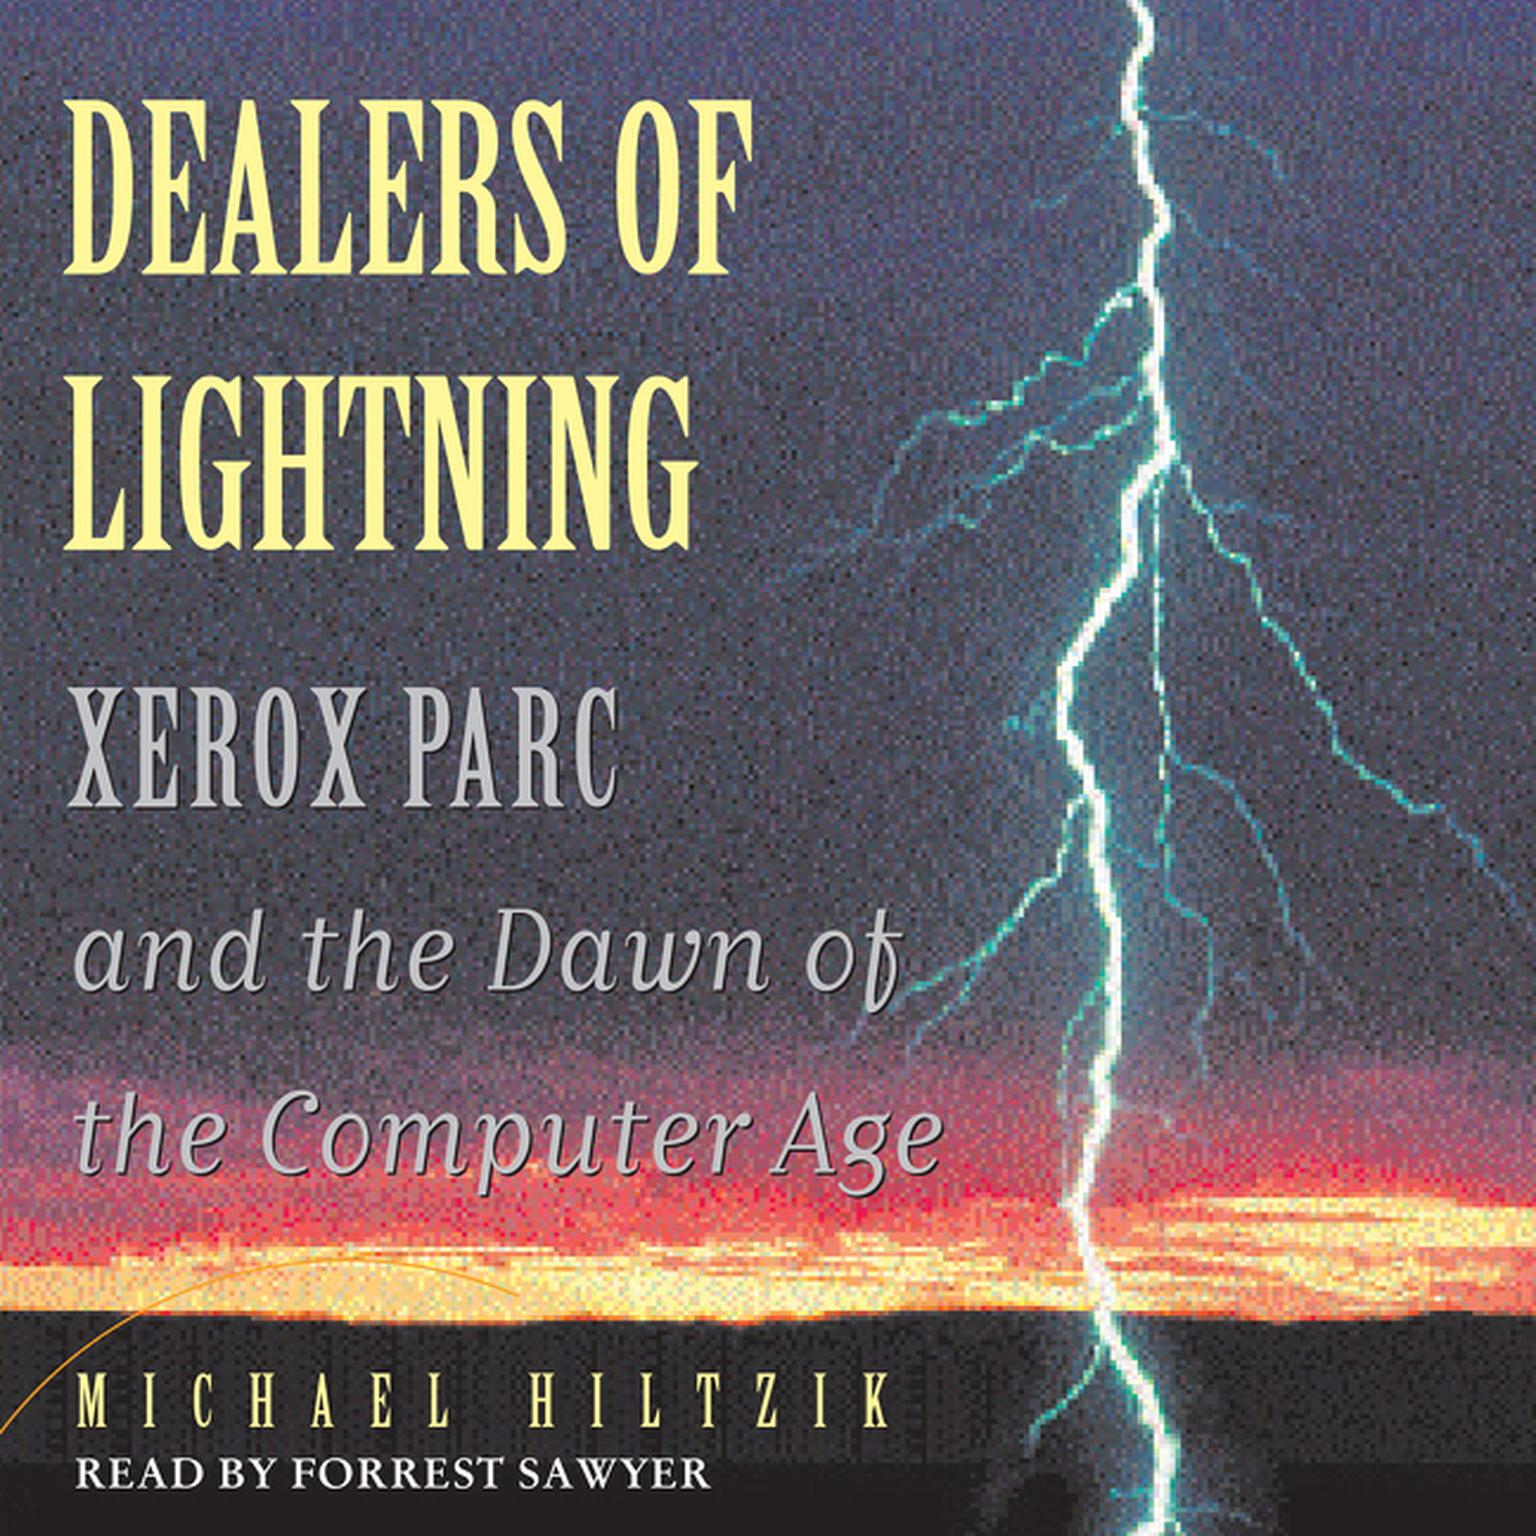 Dealers of Lightning (Abridged): Xerox PARC and the Dawn of the Computer Age Audiobook, by Michael A. Hiltzik